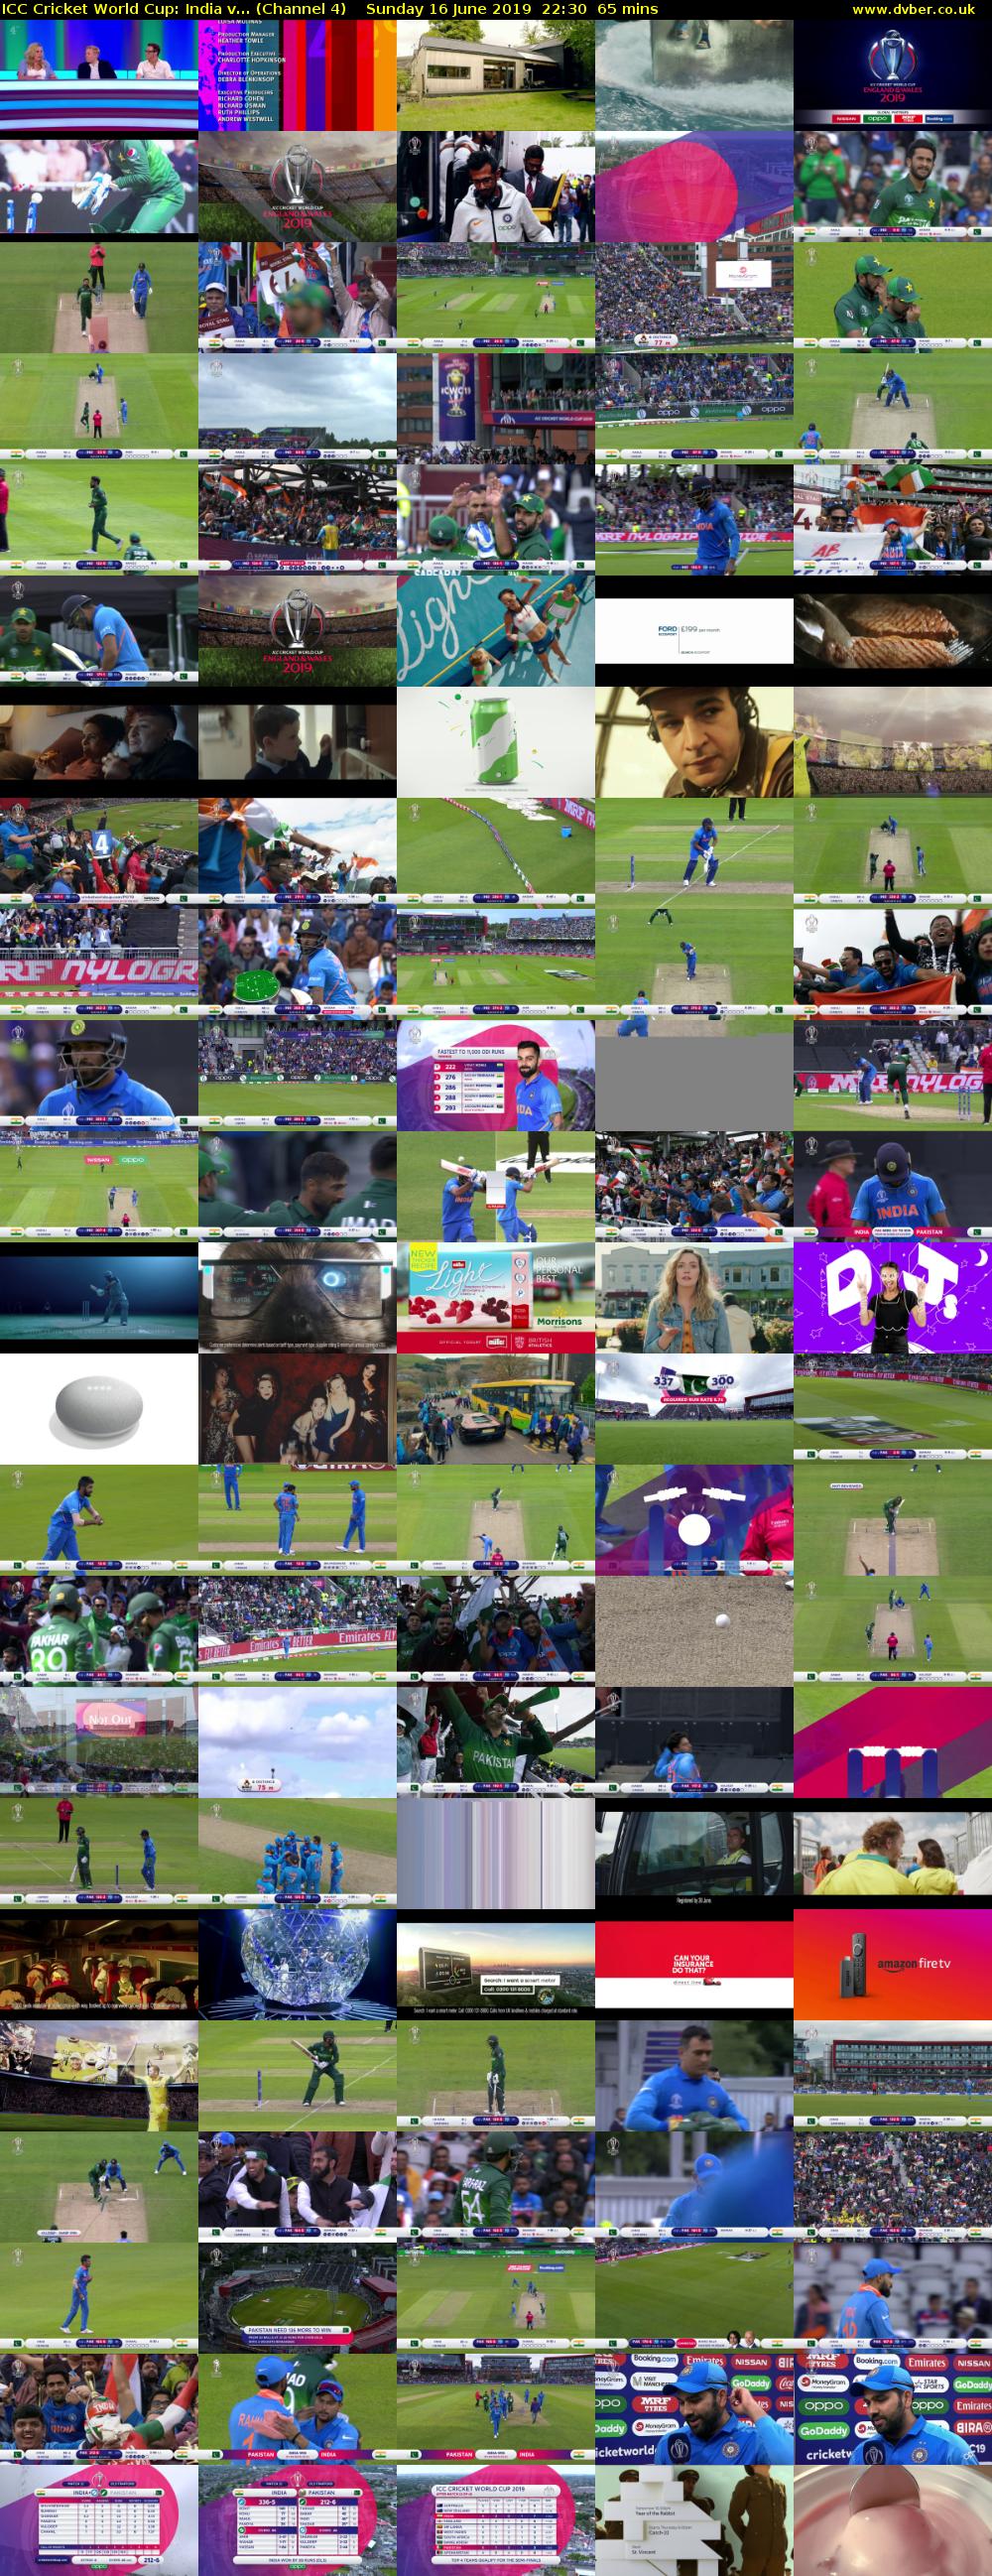 ICC Cricket World Cup: India v... (Channel 4) Sunday 16 June 2019 22:30 - 23:35